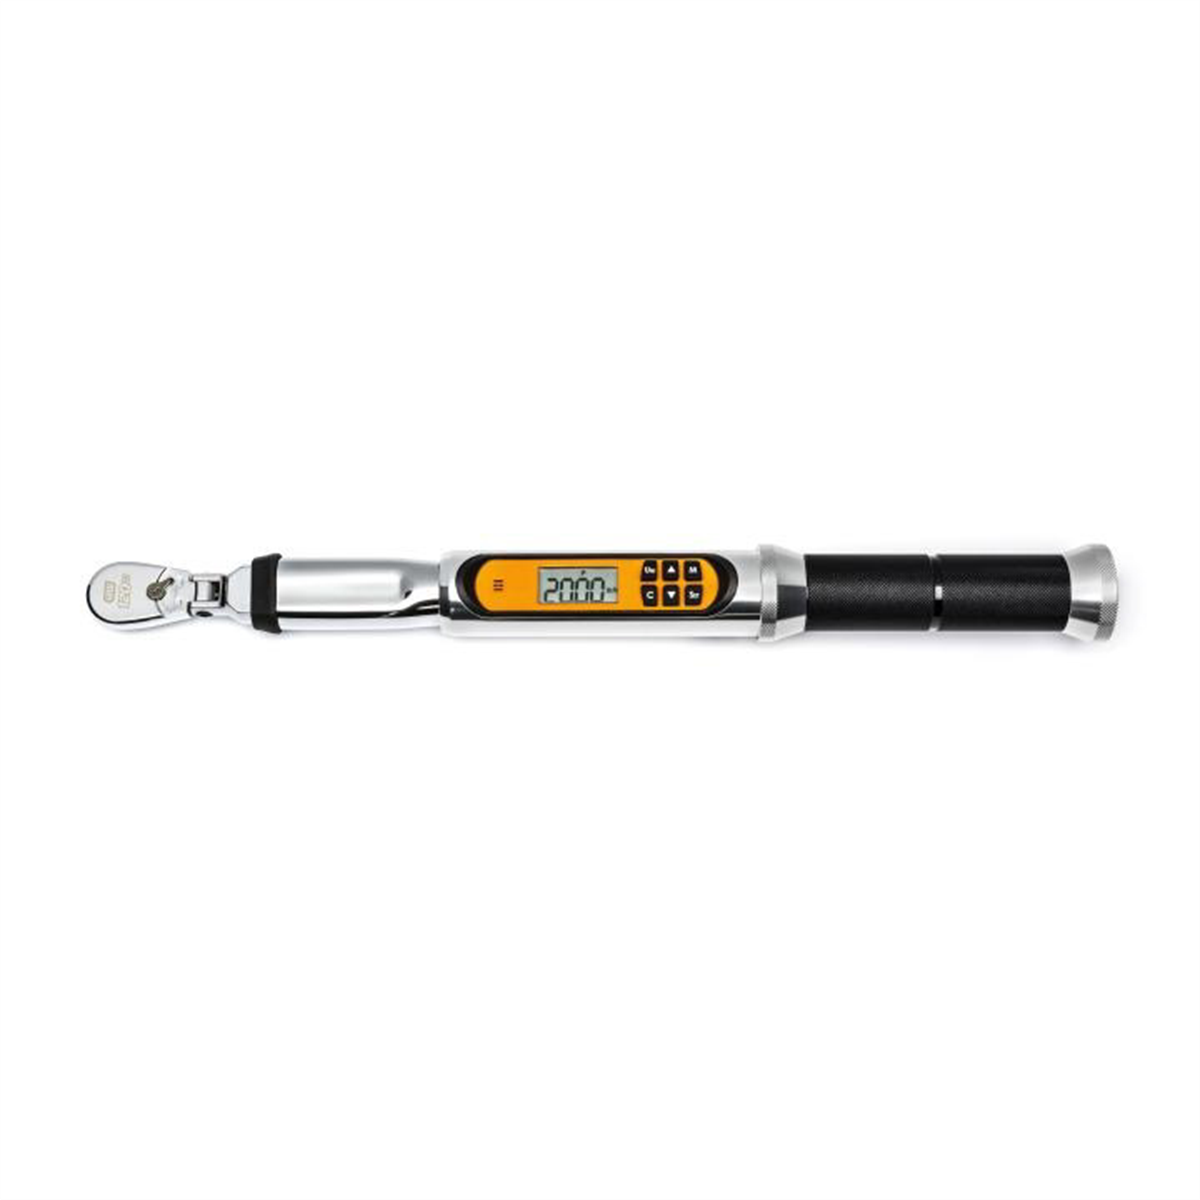 1/4" Dr. 120XP Micrometer Torque Wrench with Angle 2-20FT/LB